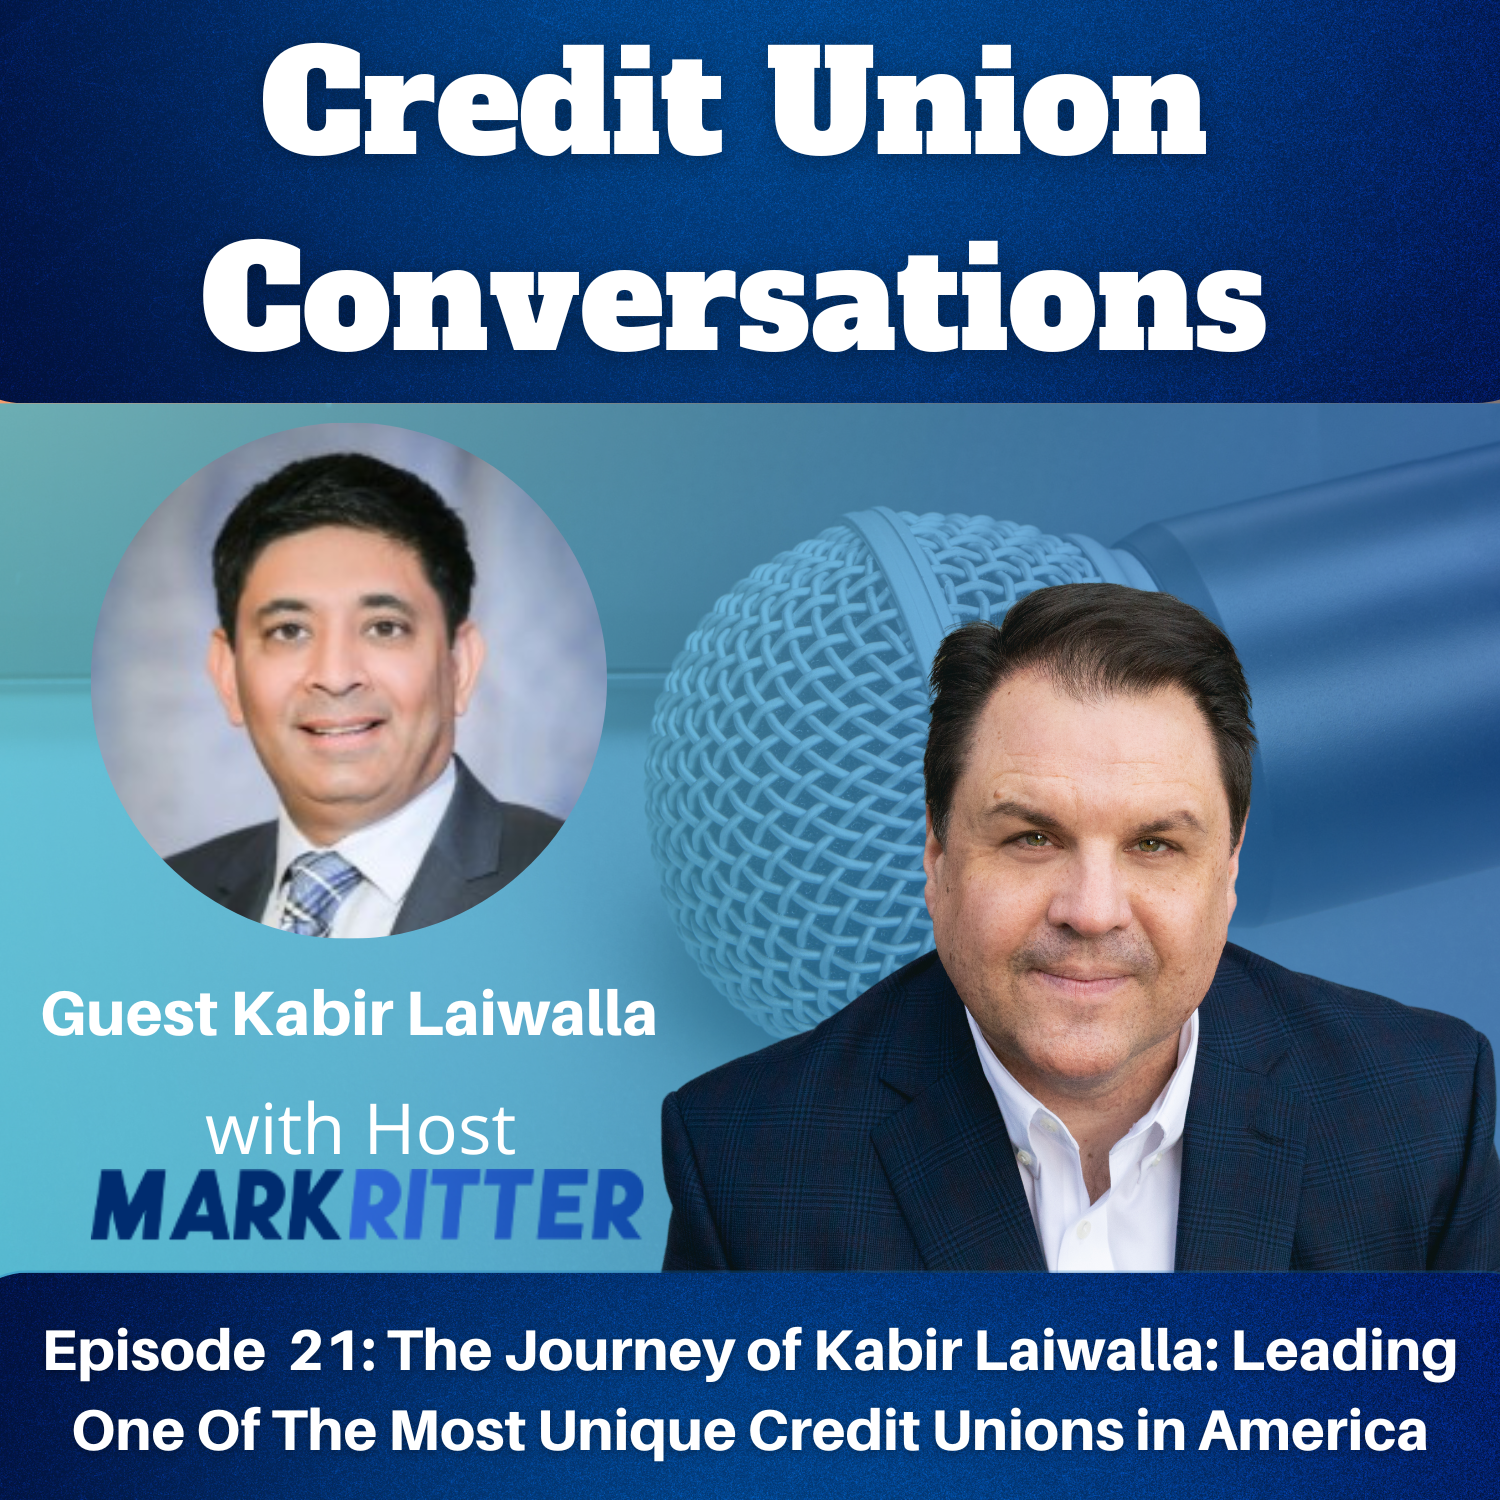 The Journey of Kabir Laiwalla: Leading One Of The Most Unique Credit Unions in America